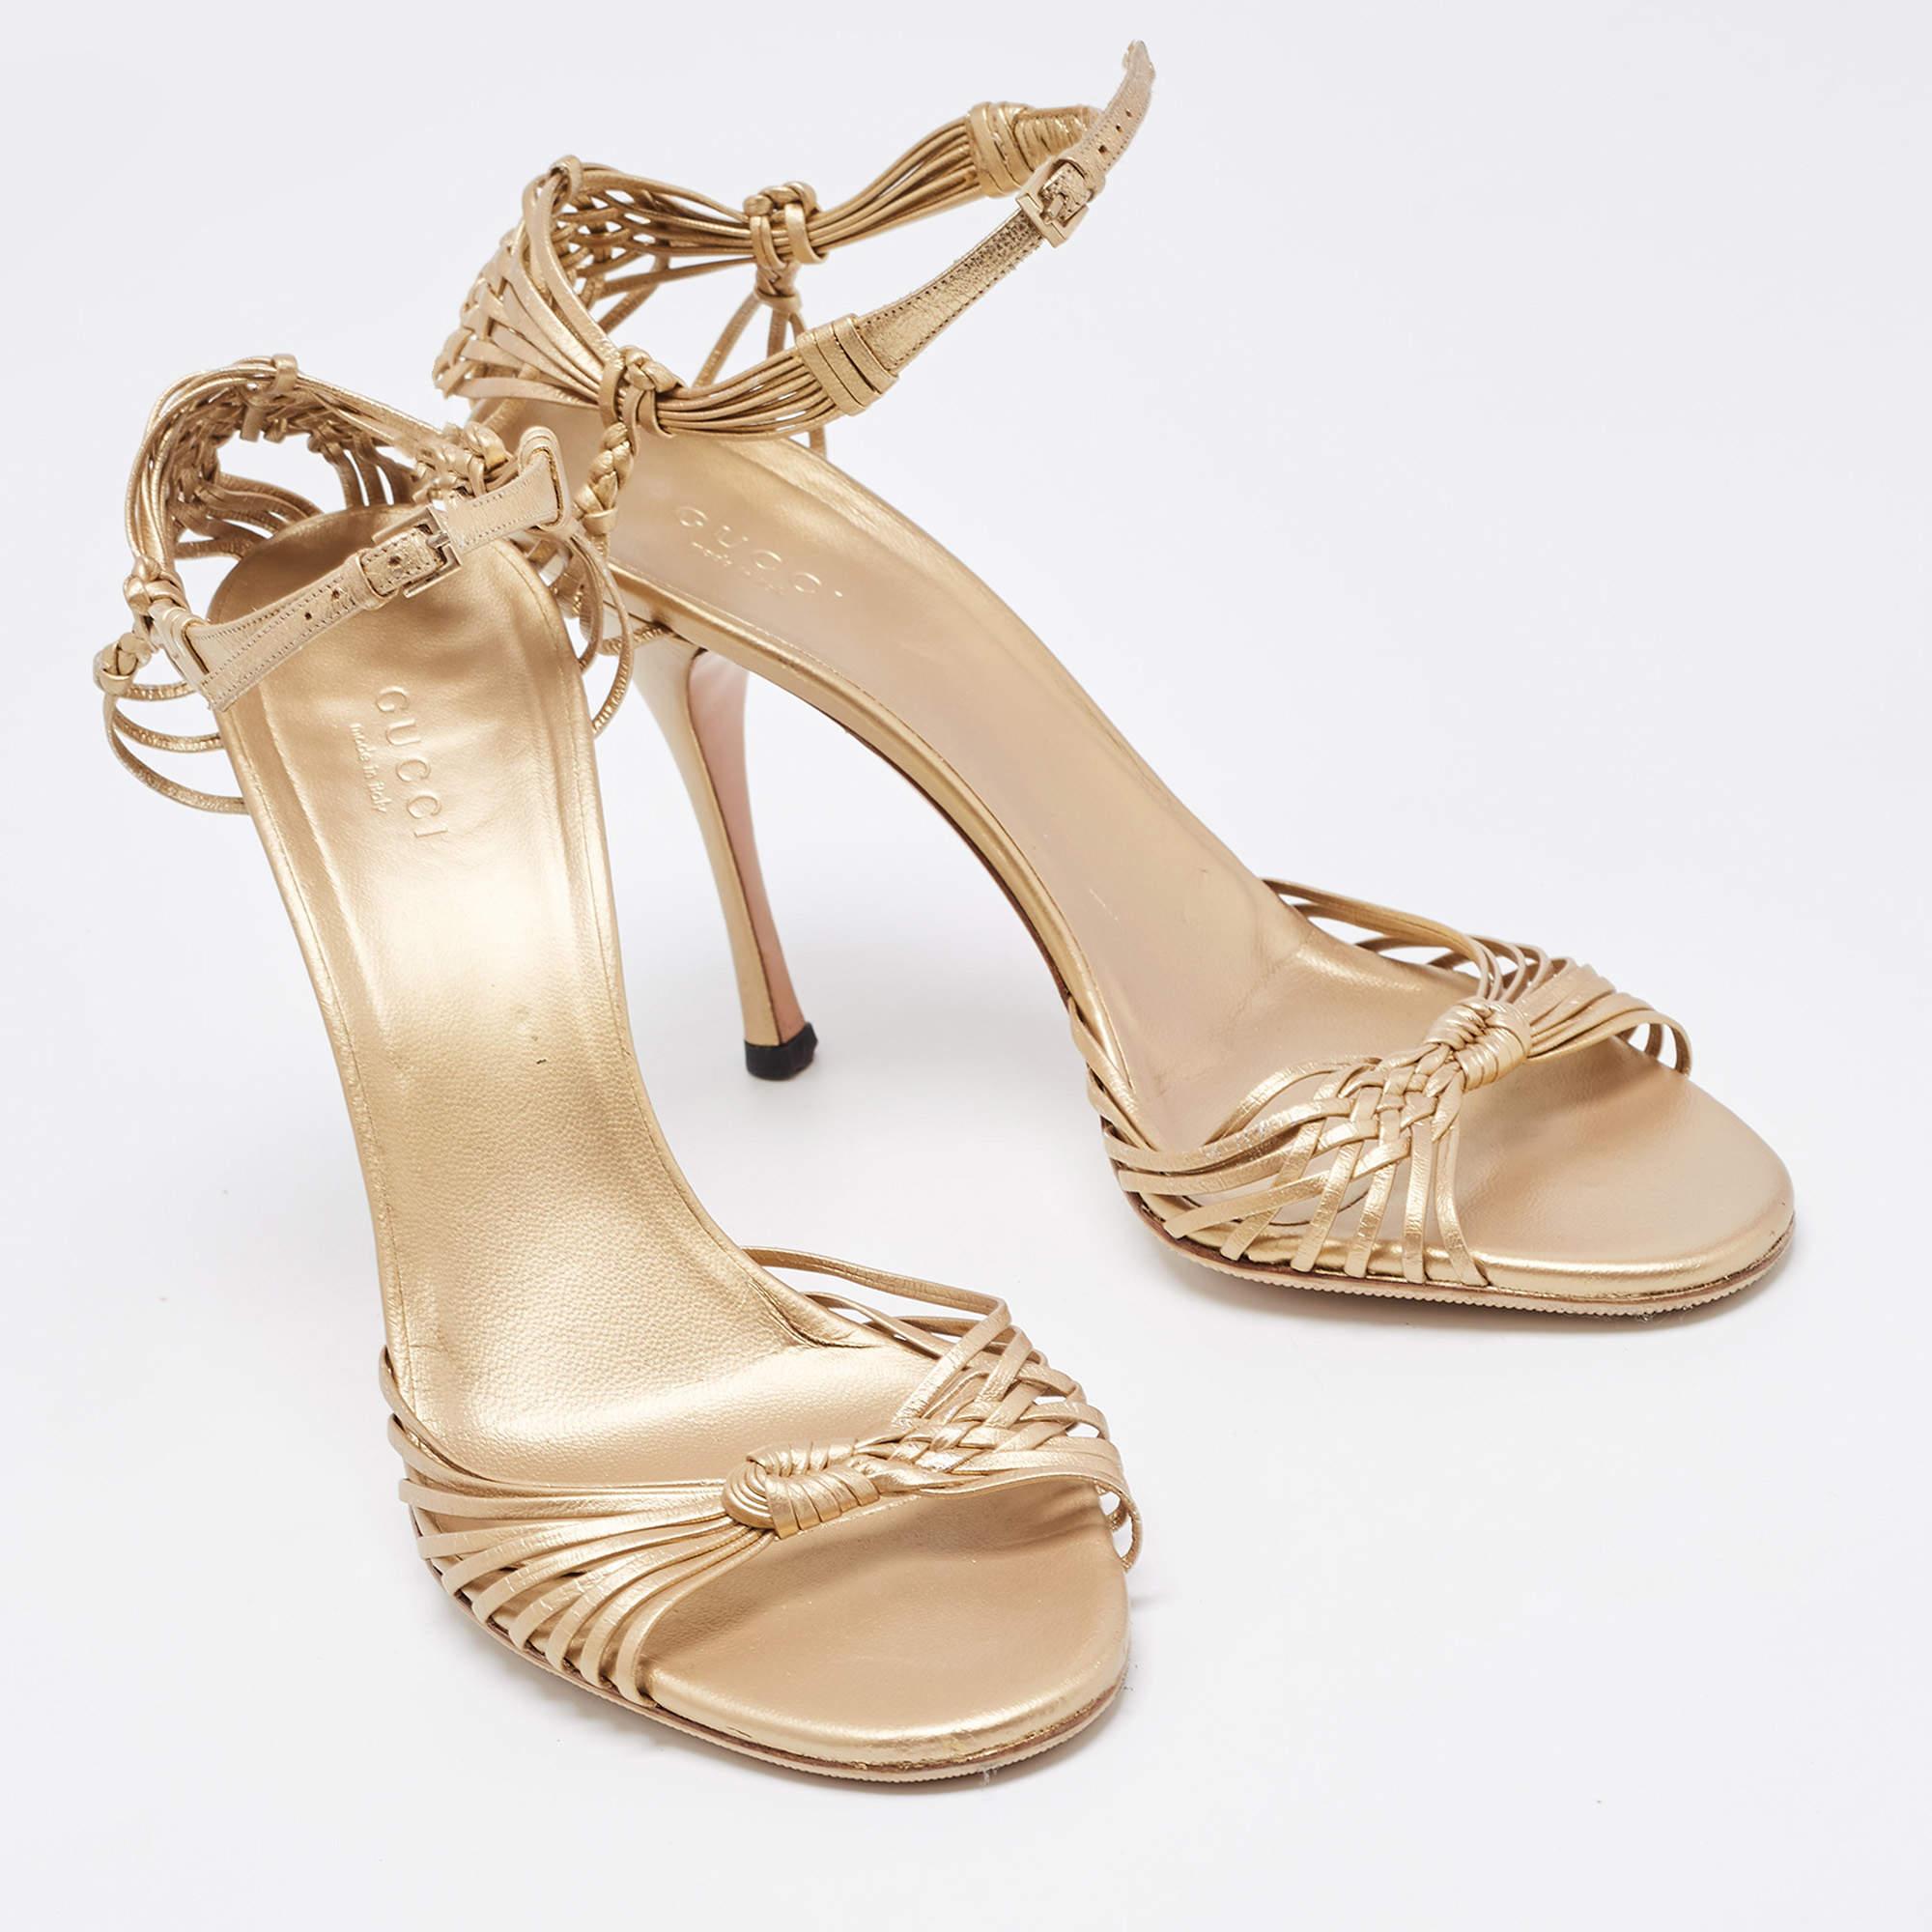 Gucci Gold Leather Ankle Strap Sandals Size 39.5 1